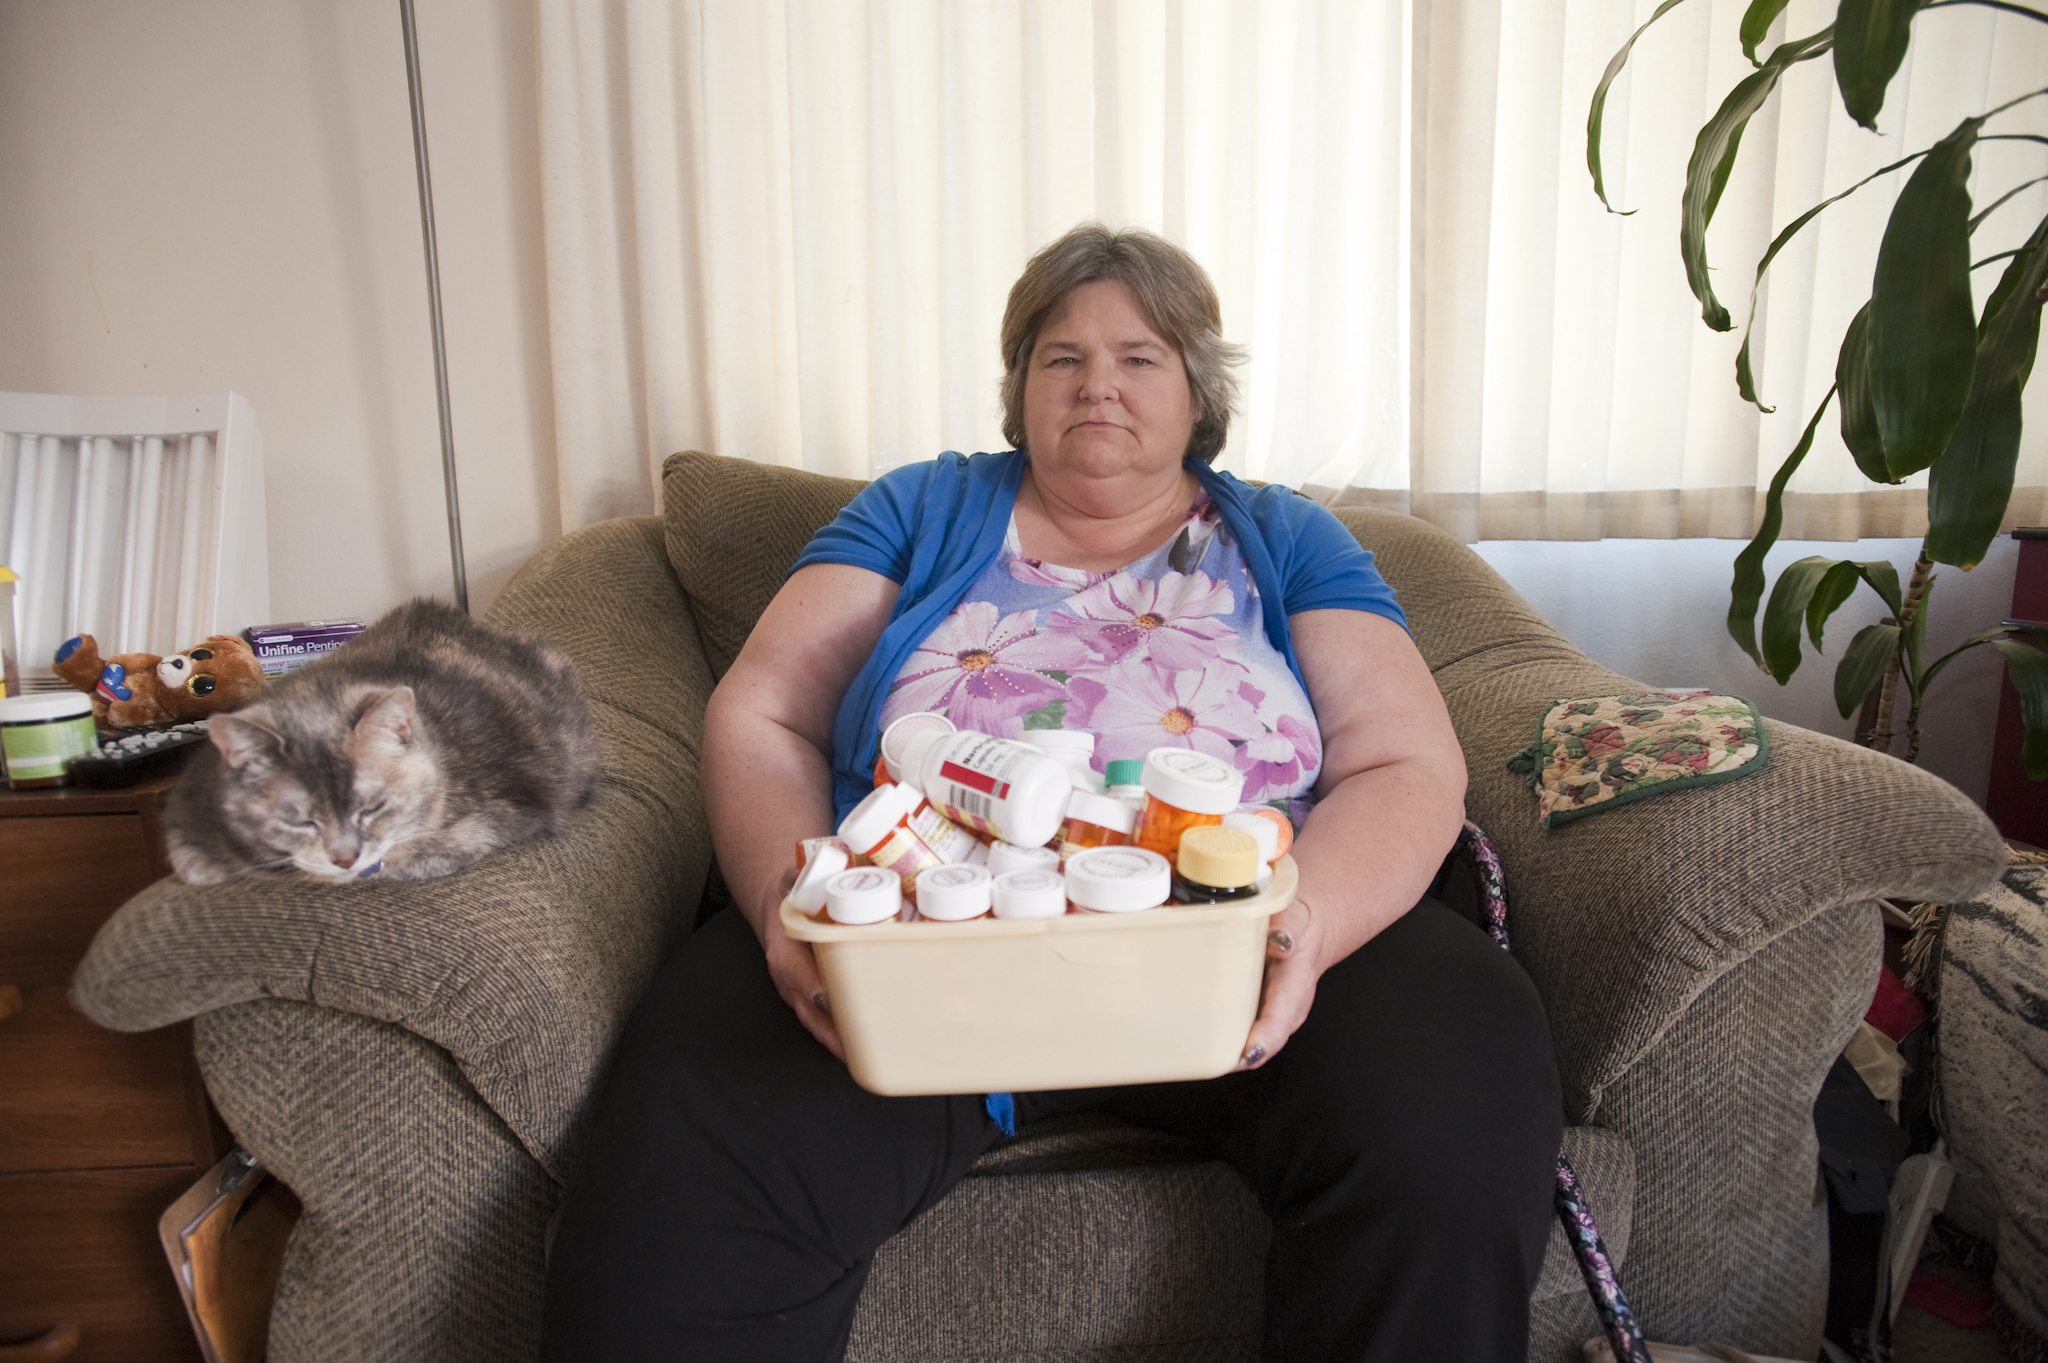 Kay Roberson, at her Vancouver home with her cat Sophie, holds a box of medications she&#039;s been prescribed for diagnosed mental health issues and several chronic health issues. Roberson spent most of her life on Medicaid.